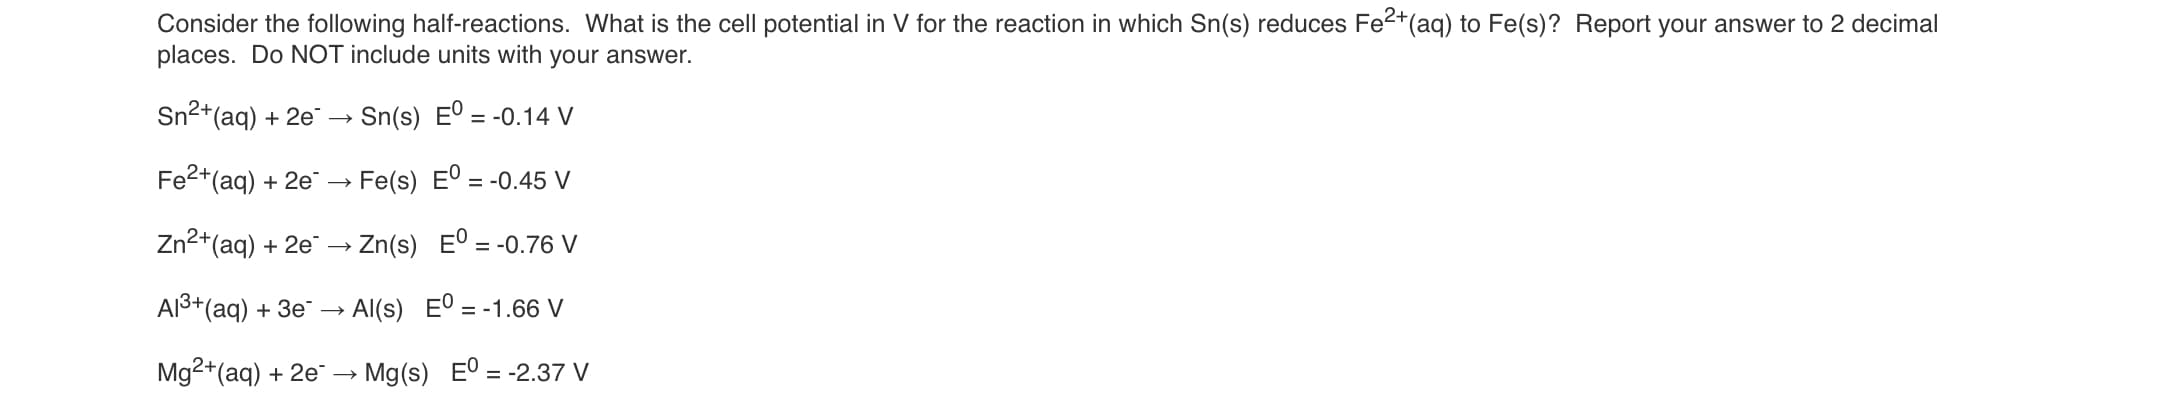 Consider the following half-reactions. What is the cell potential in V for the reaction in which Sn(s) reduces Fe2+(aq) to Fe(s)? Report your answer to 2 decimal
places. Do NOT include units with your answer.
Sn2+(aq) + 2e"
Sn(s) Eº = -0.14 V
Fe2+(aq) + 2e
Fe(s) Eº
= -0.45 V
Zn2+(aq) + 2e → Zn(s) E° = -0.76 V
Al3+(aq) + 3e¯ → Al(s) E° = -1.66 V
Mg2+(aq) + 2e → Mg(s) E° = -2.37 V
